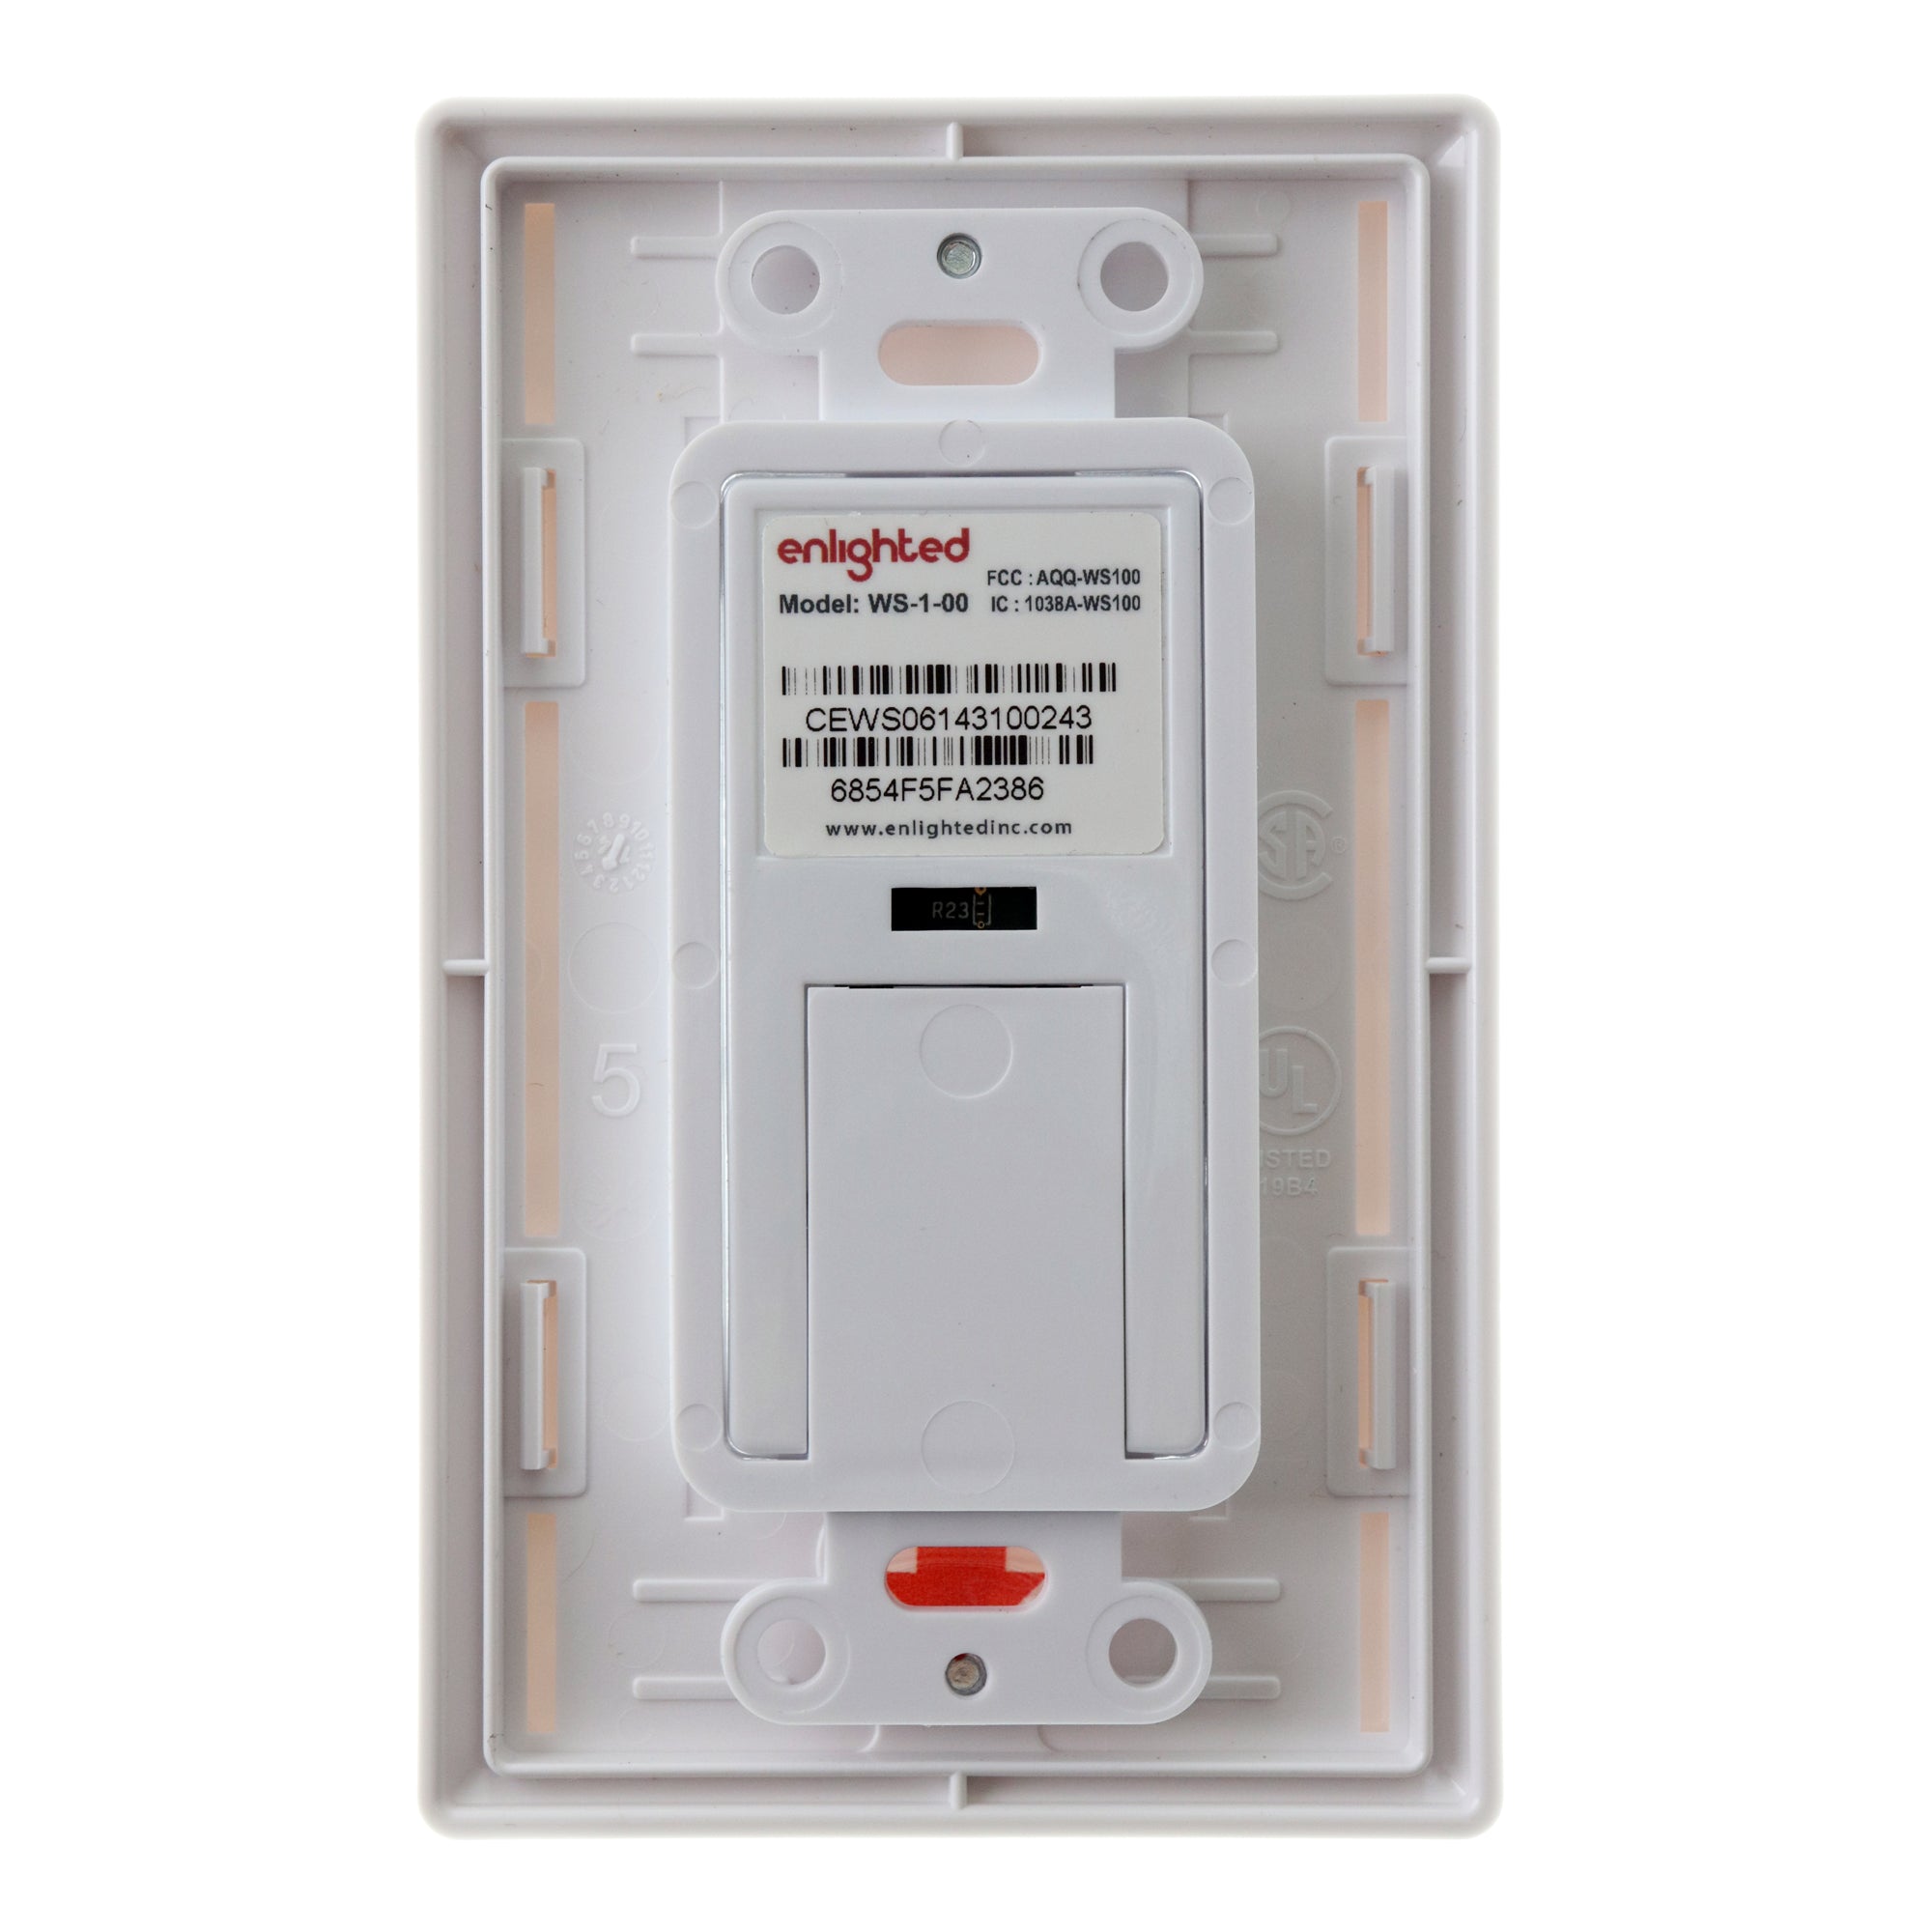 Enlightened Lighting, ENLIGHTED LIGHTING WS-1-00 WIRELESS ROOM CONTROLLER SWITCH, 4-BUTTON, WHITE